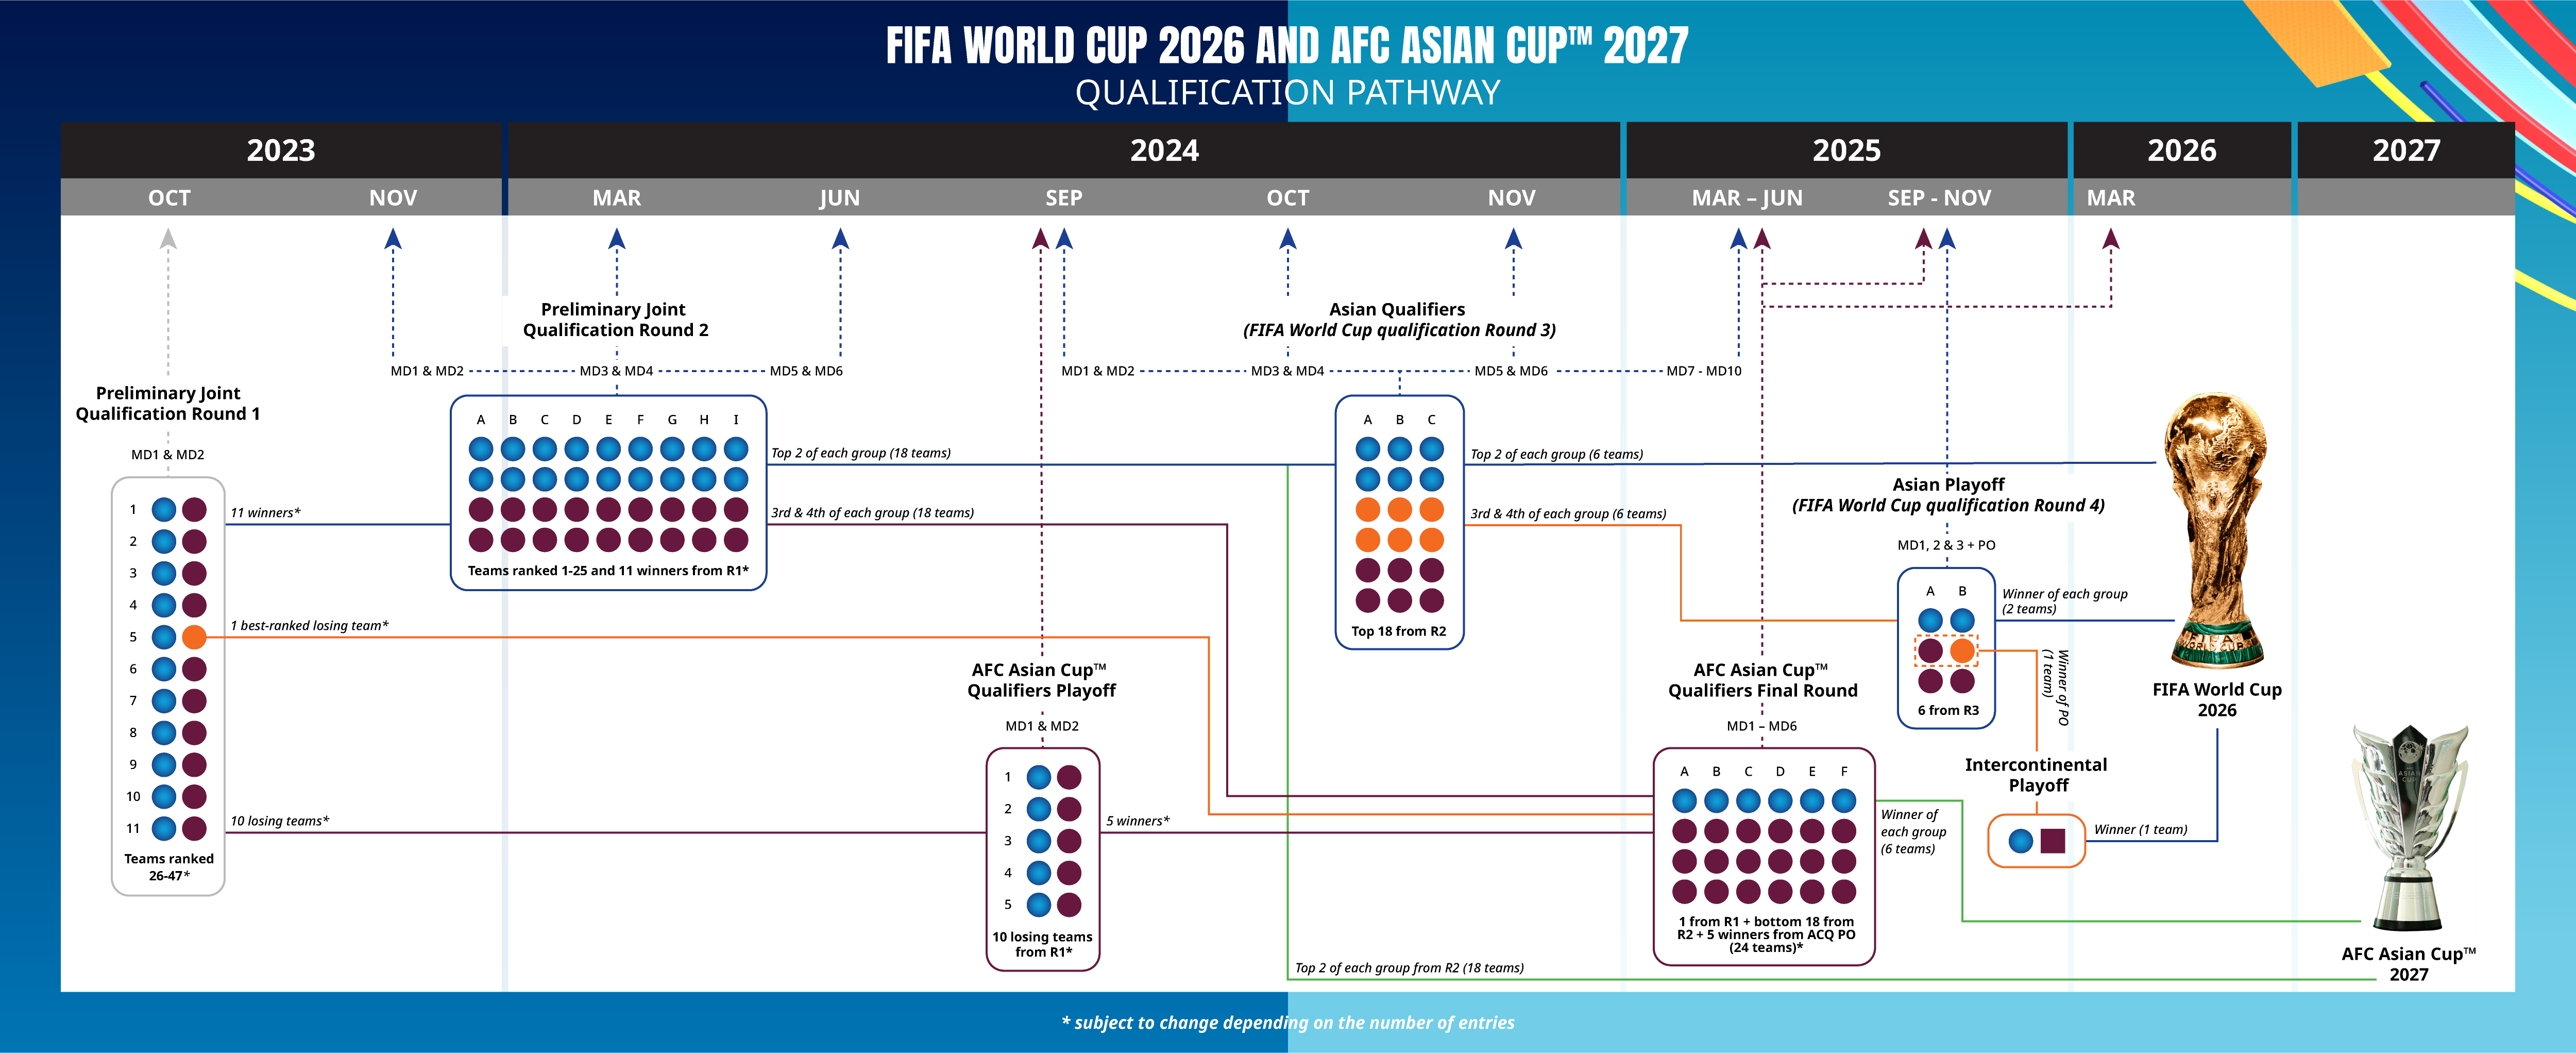 Asia’s pathway to the FIFA World Cup 2026 and AFC Asian Cup™ 2027